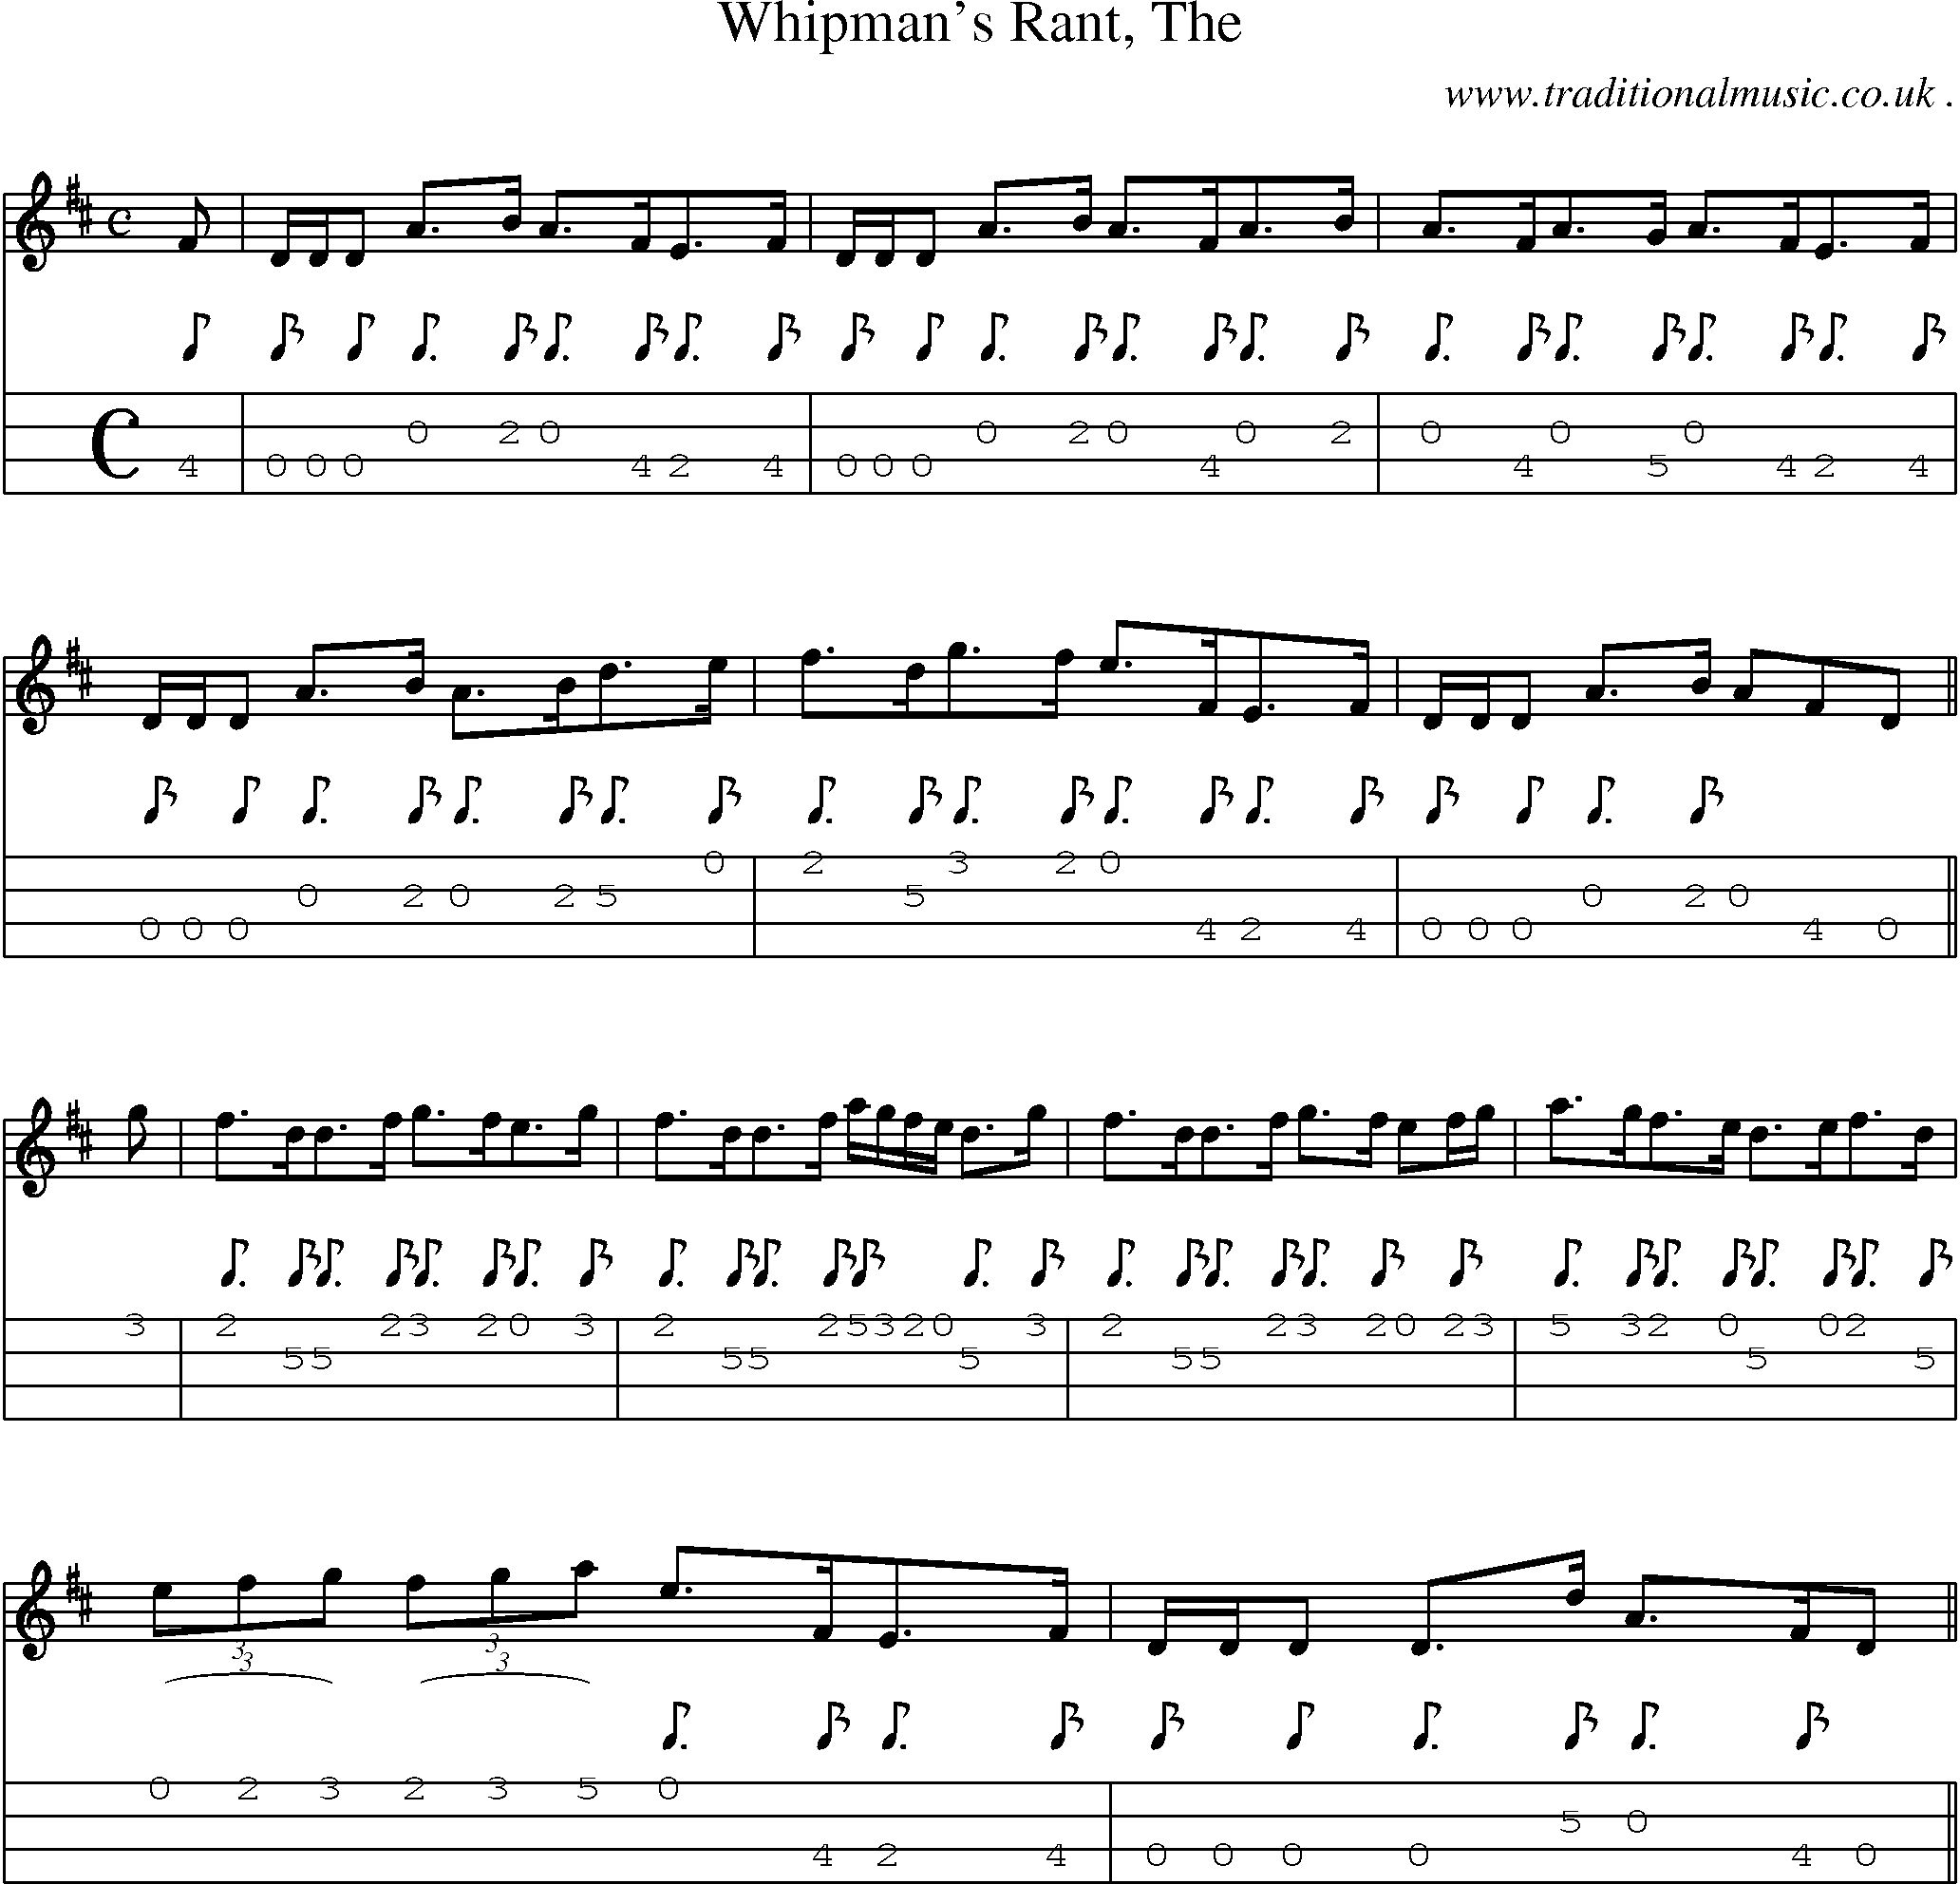 Sheet-music  score, Chords and Mandolin Tabs for Whipmans Rant The